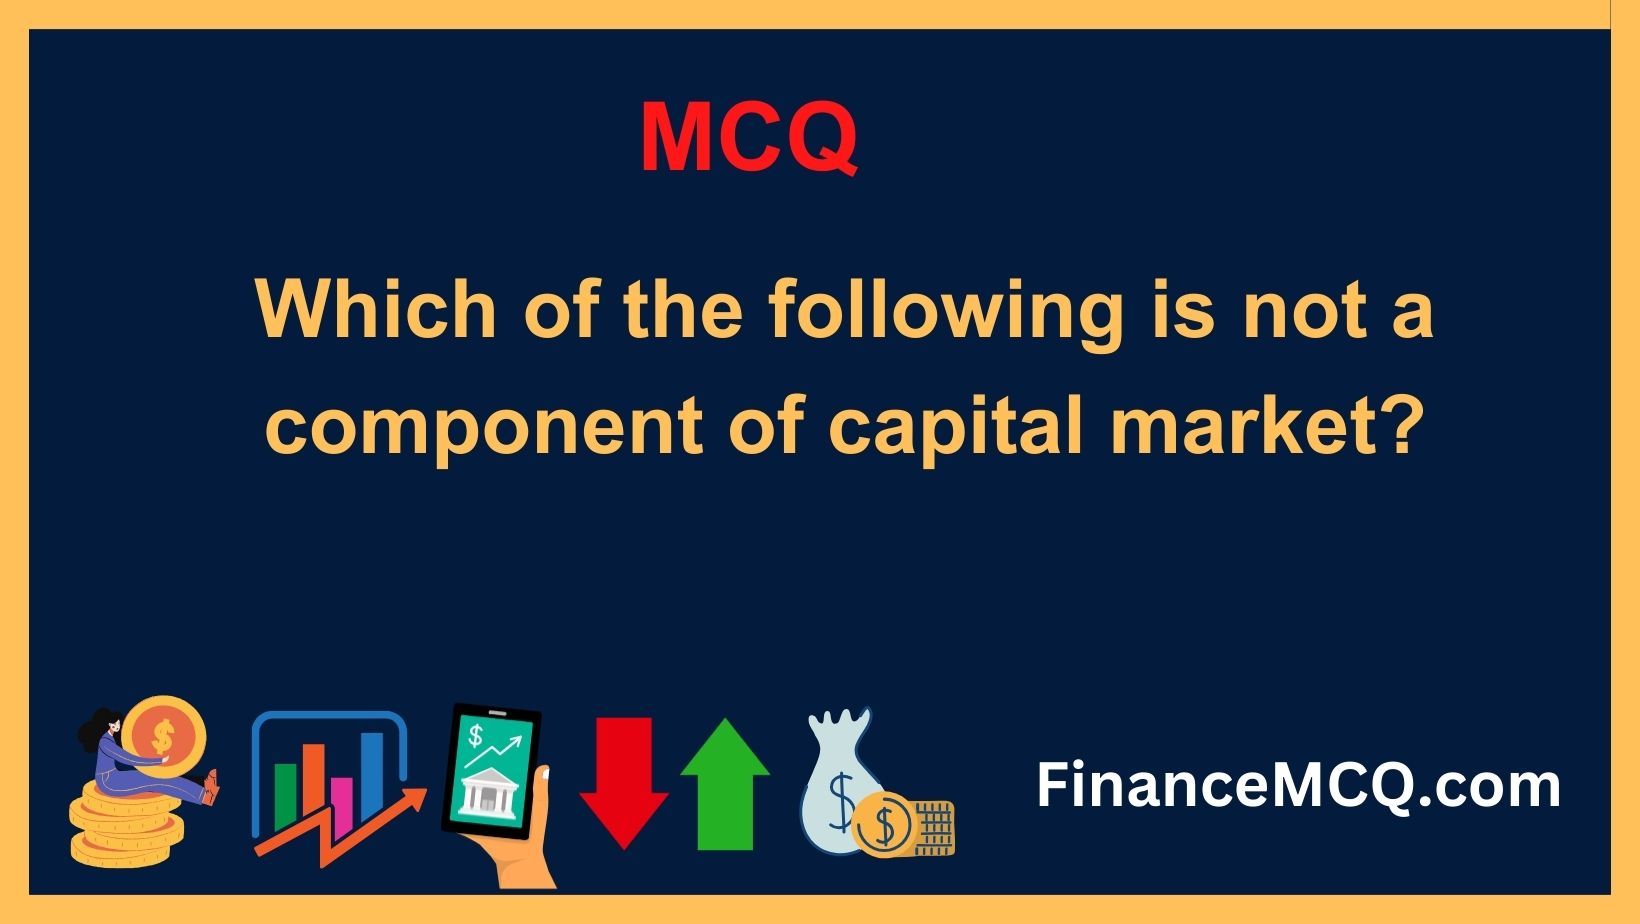 Which of the following is not a component of capital market